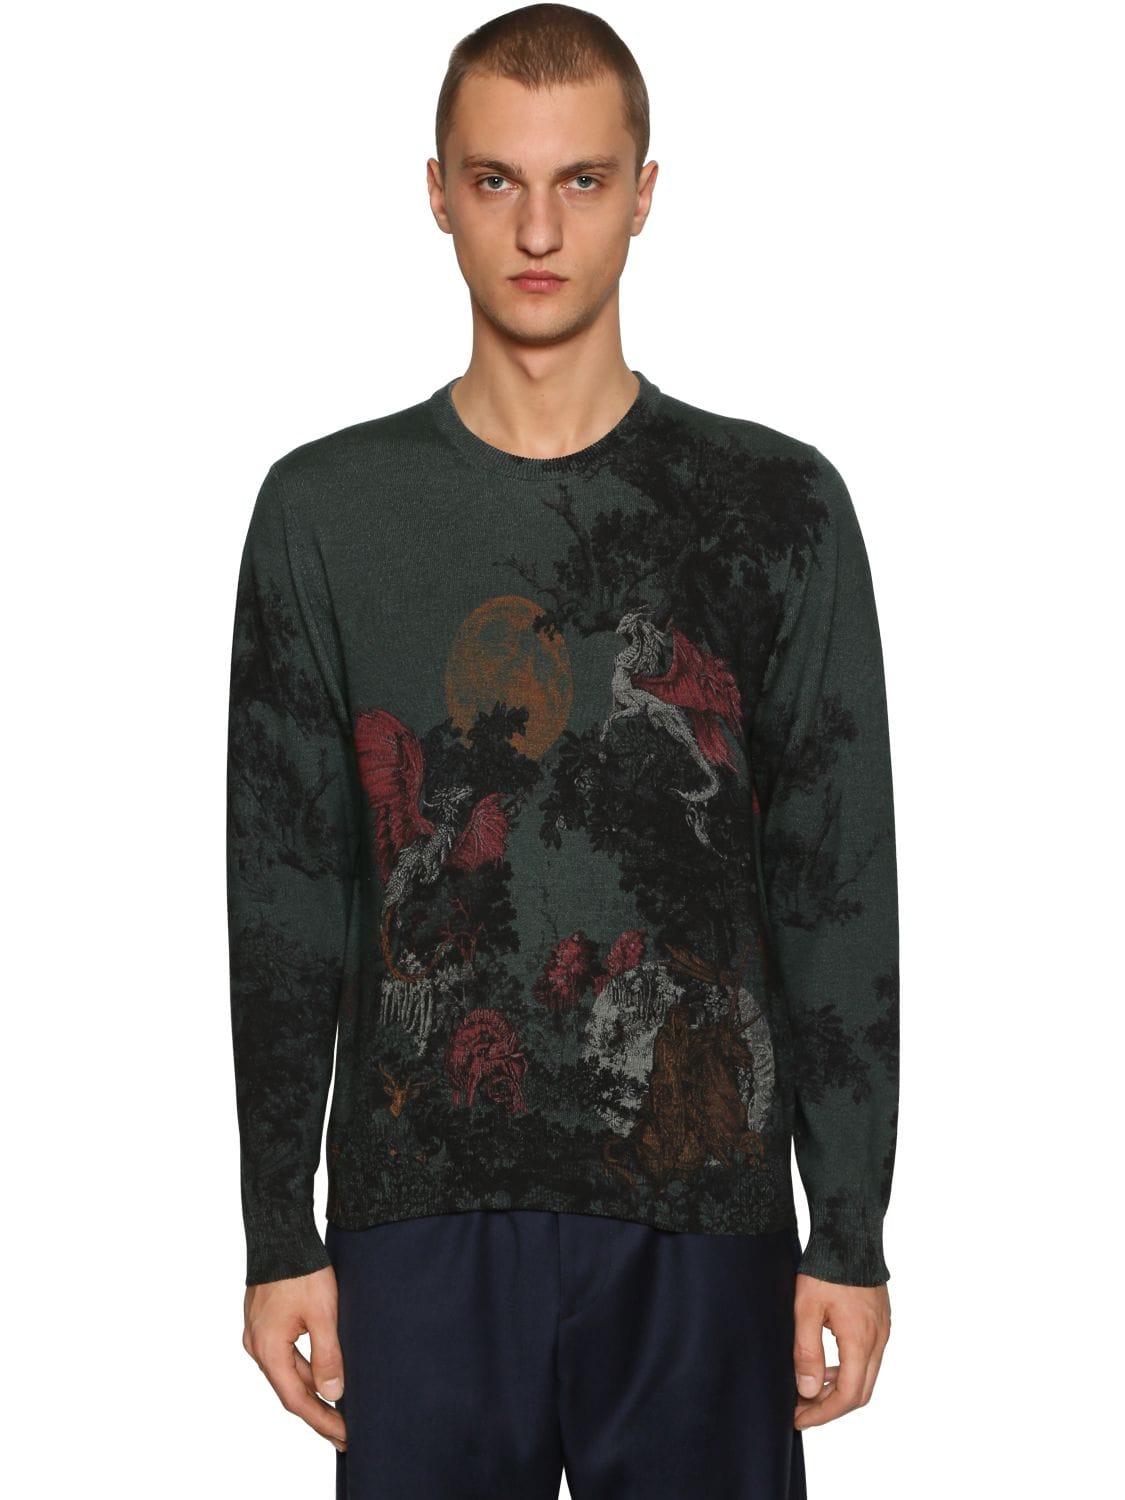 Etro Dragon Printed Wool Knit Sweater for Men - Lyst